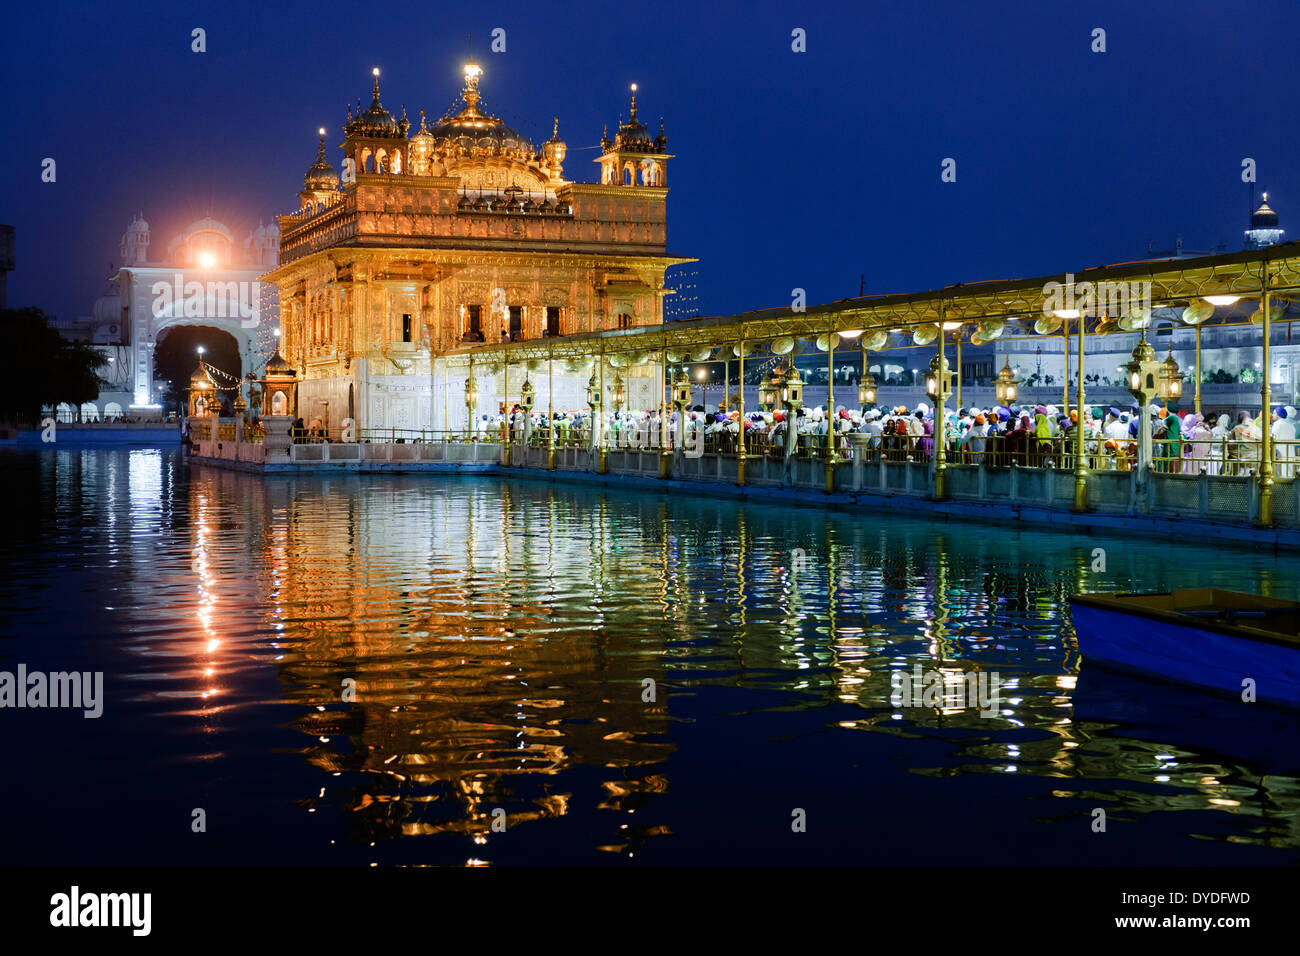 The Golden Temple in Amritsar. Stock Photo